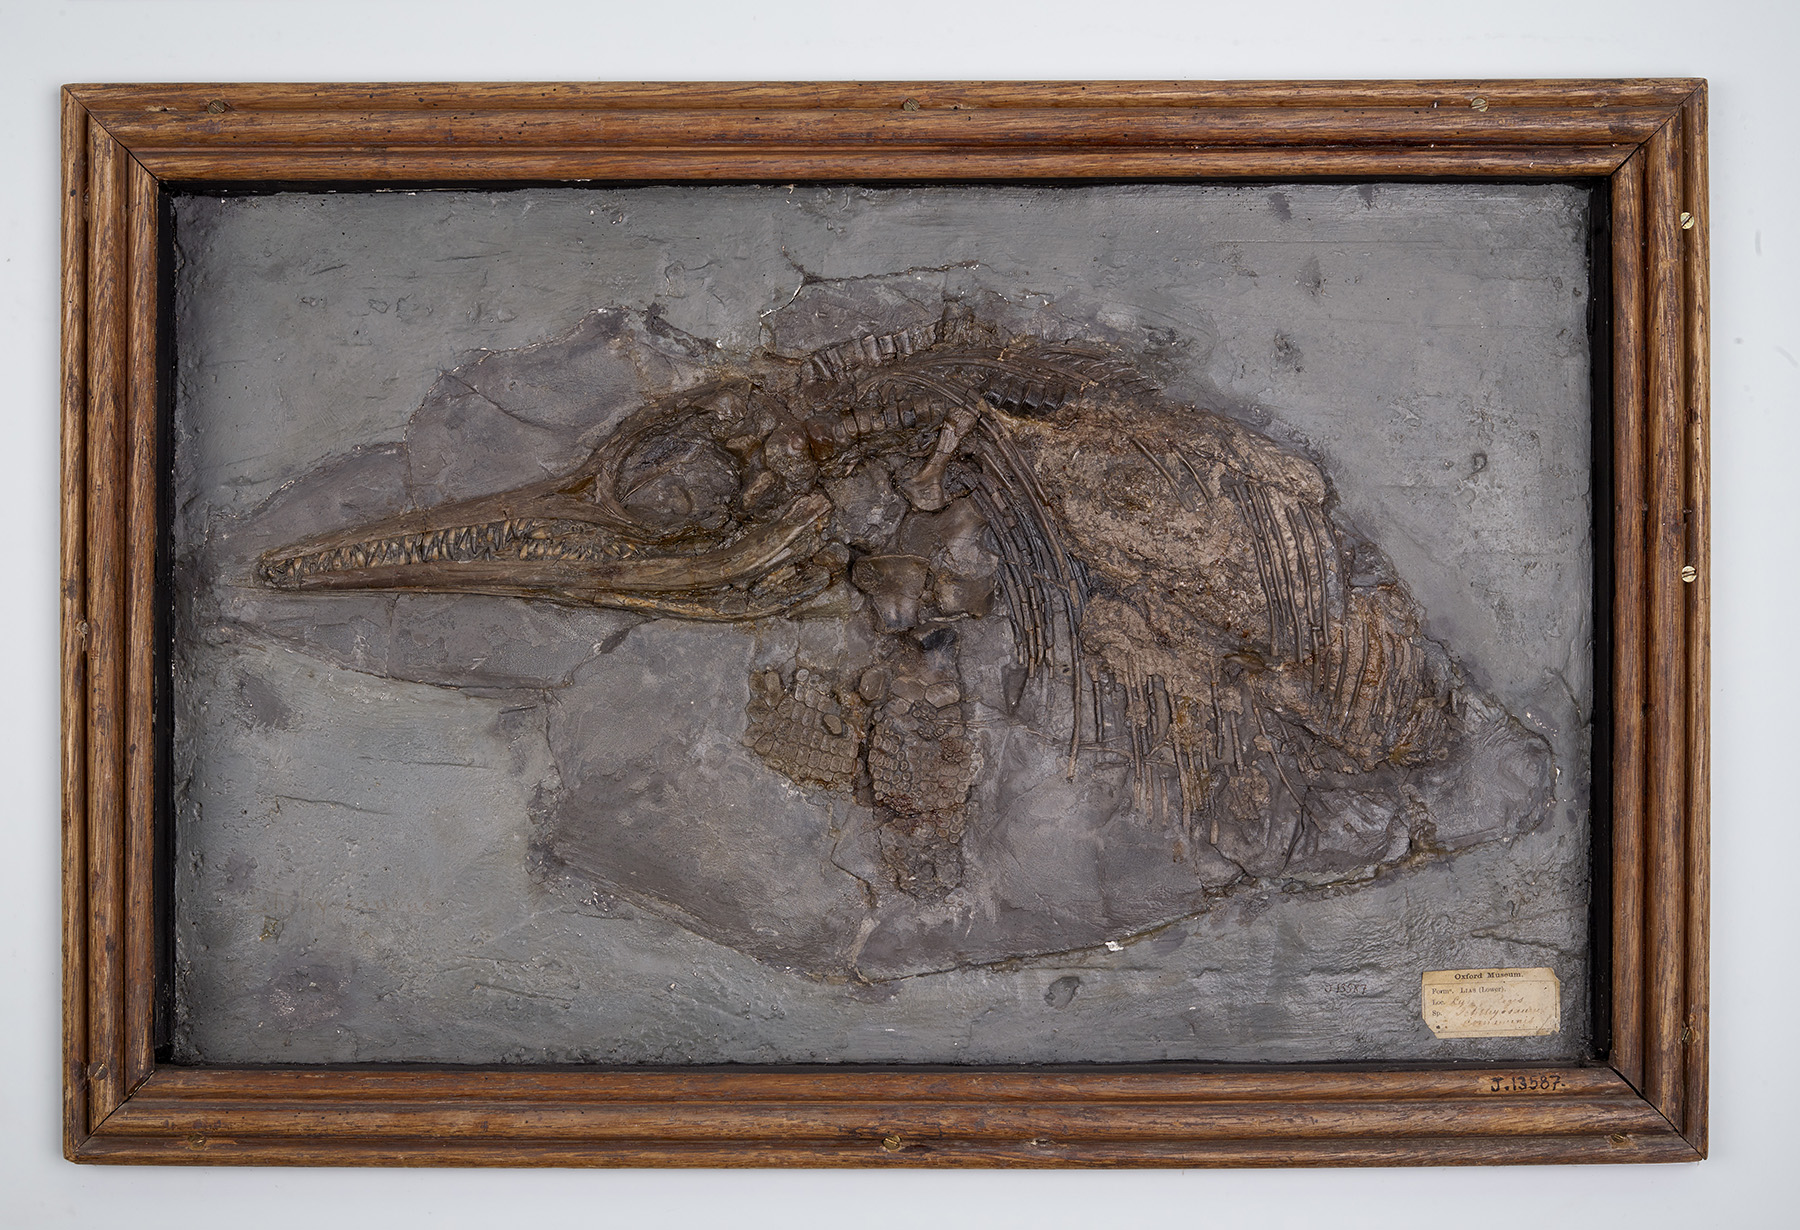 Partial skeleton of a young ichthyosaur.